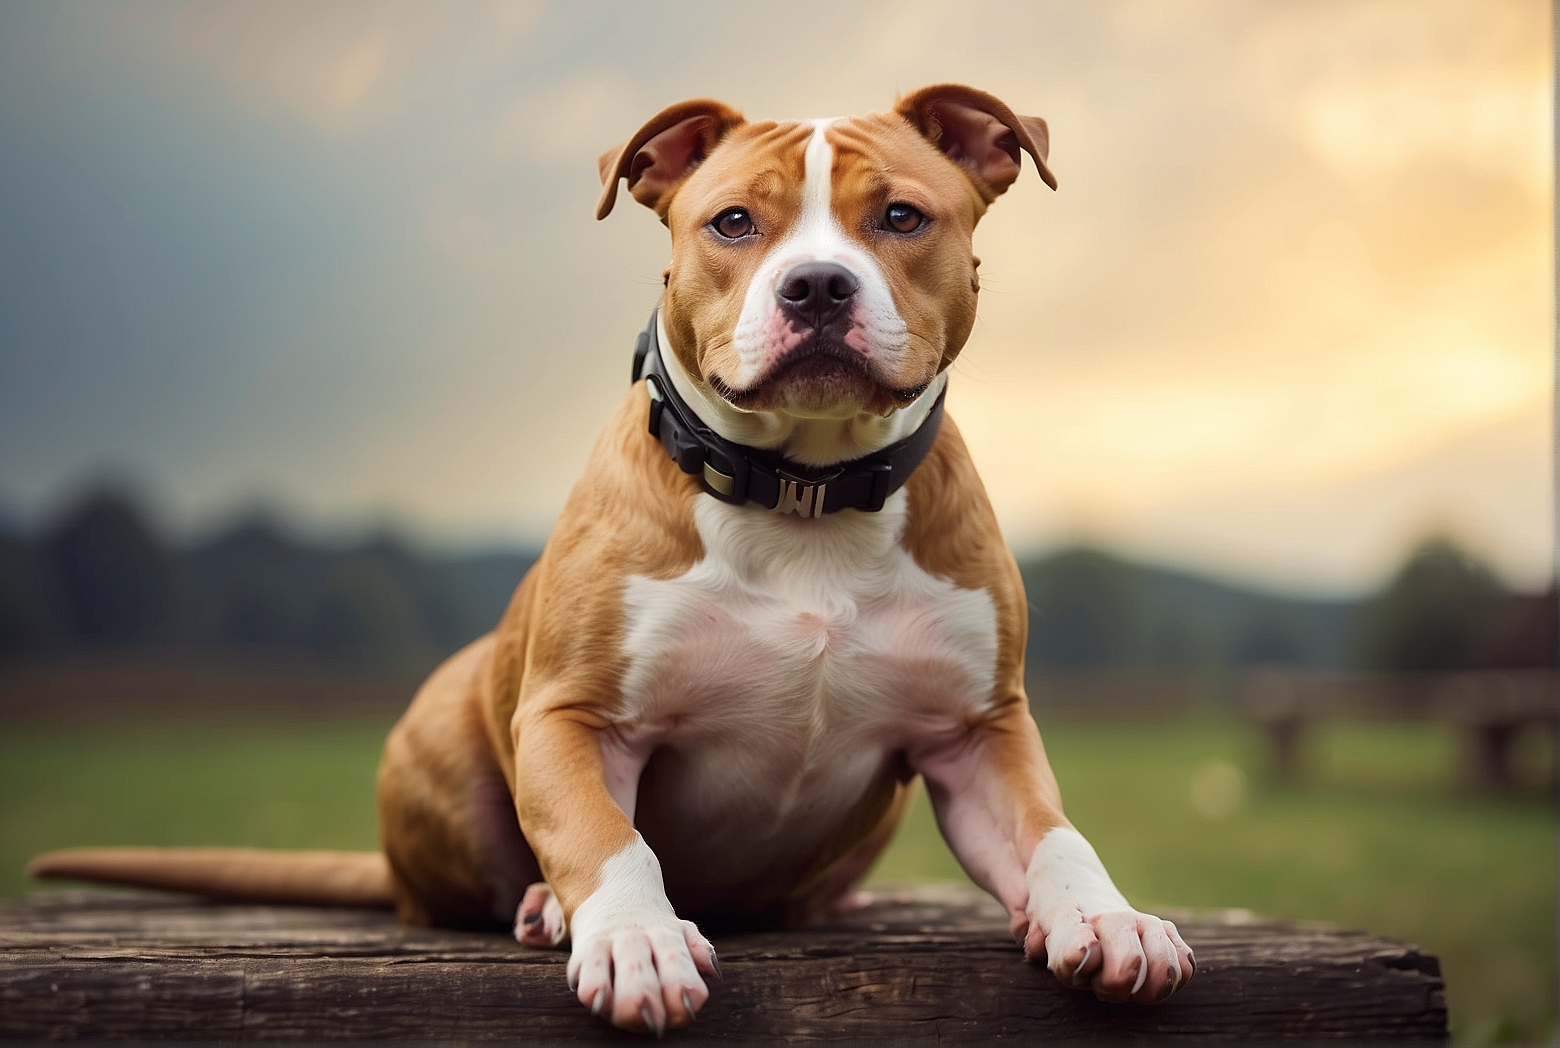 How To Take Care Of A American Staffordshire Terrier